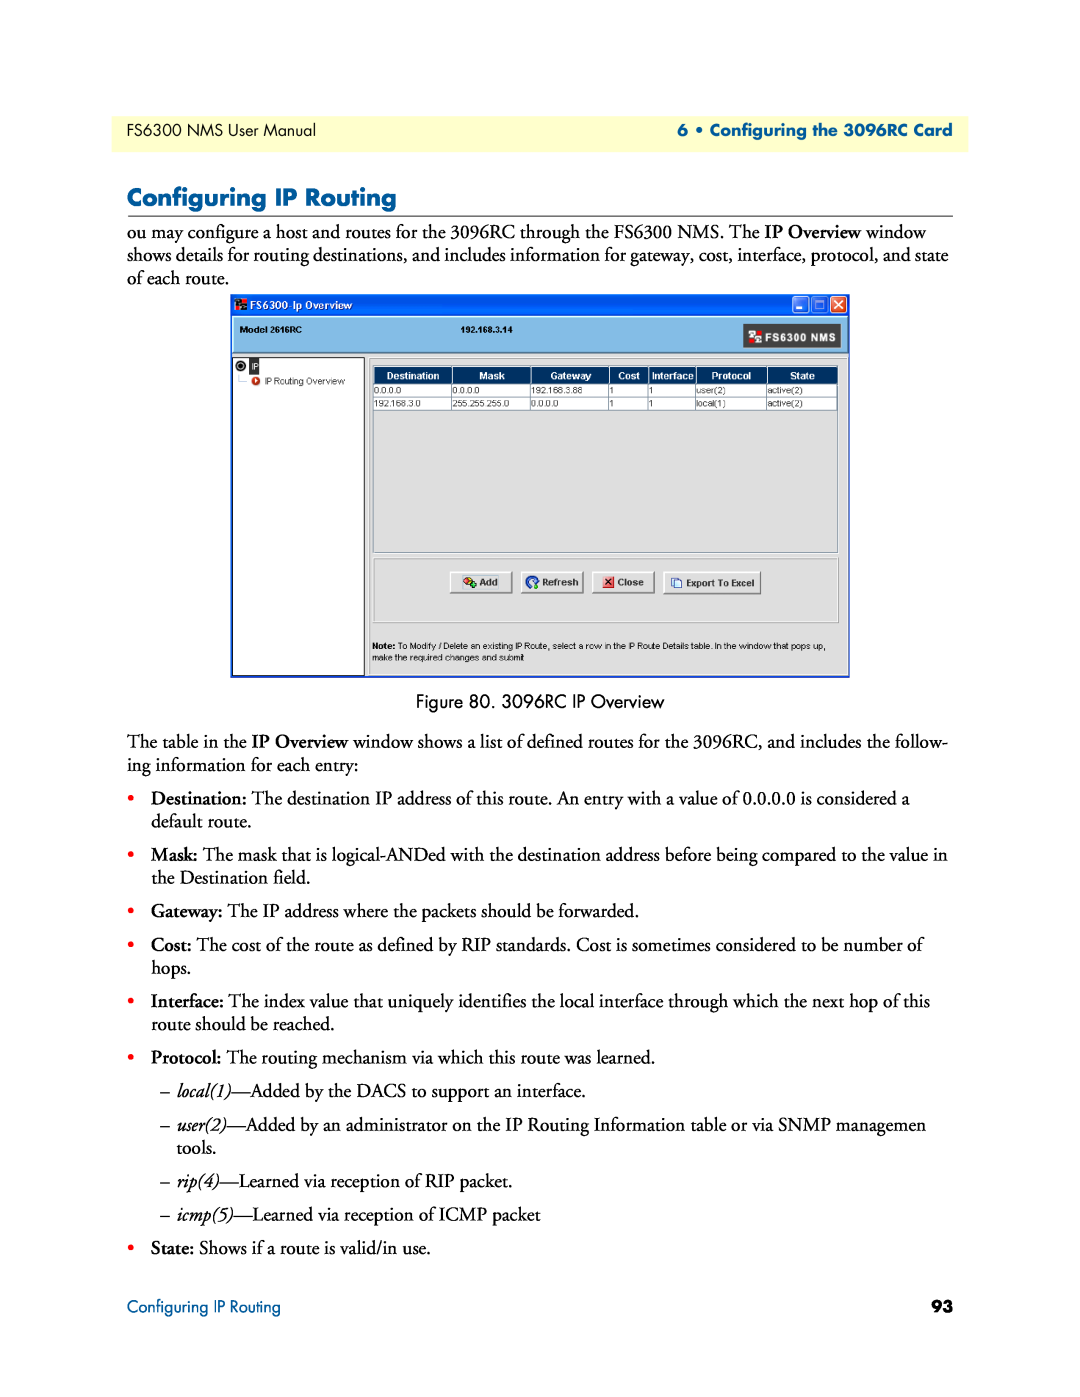 Patton electronic 6300 user manual Configuring IP Routing, 3096RC IP Overview 